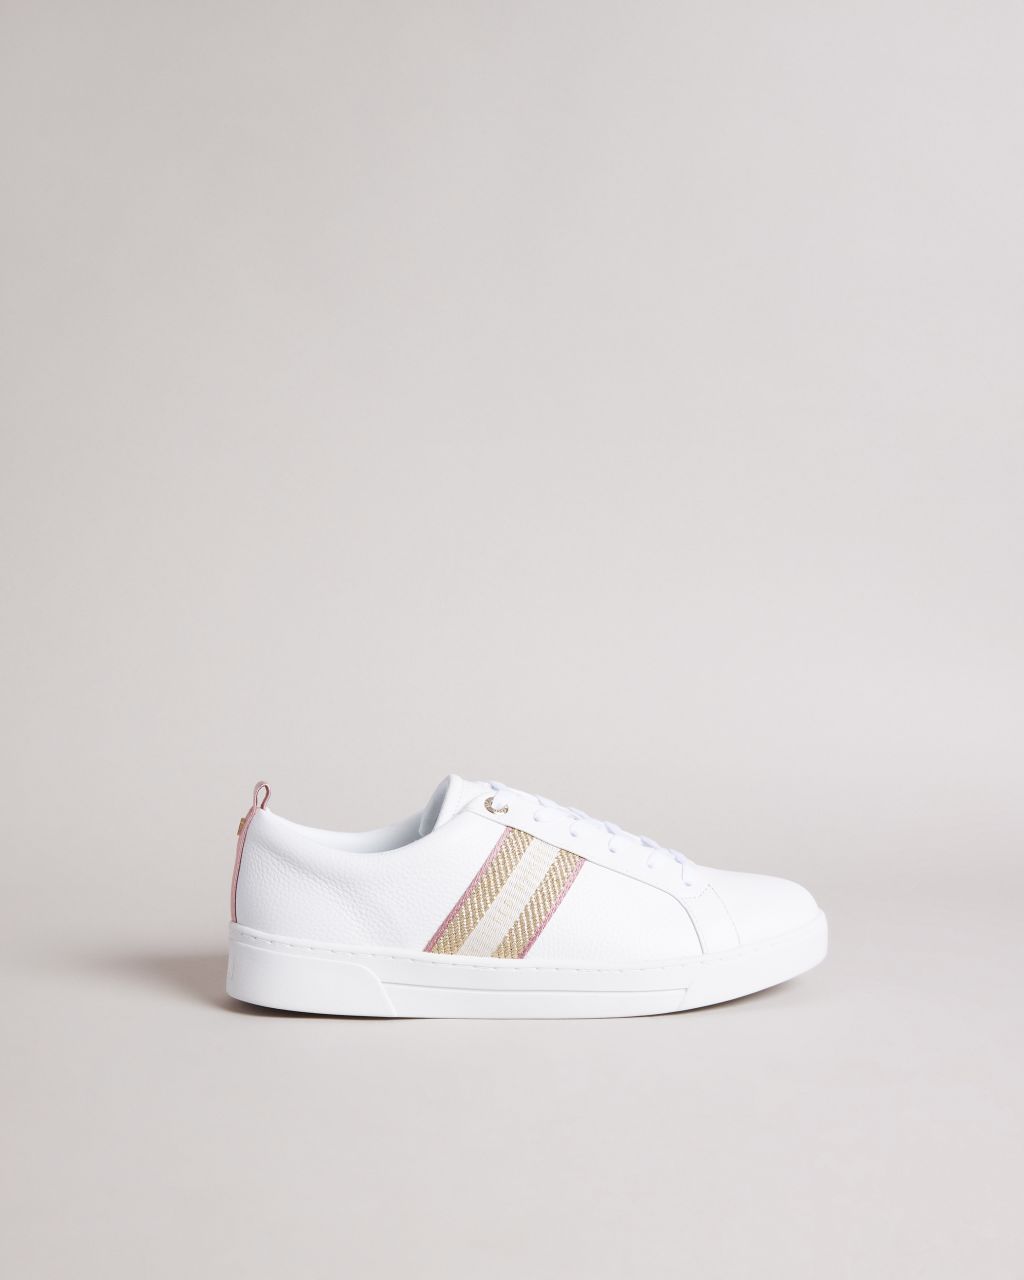 Ted Baker Women's Leather Metallic Detail Webbing Trainers in White-Navy, Baily